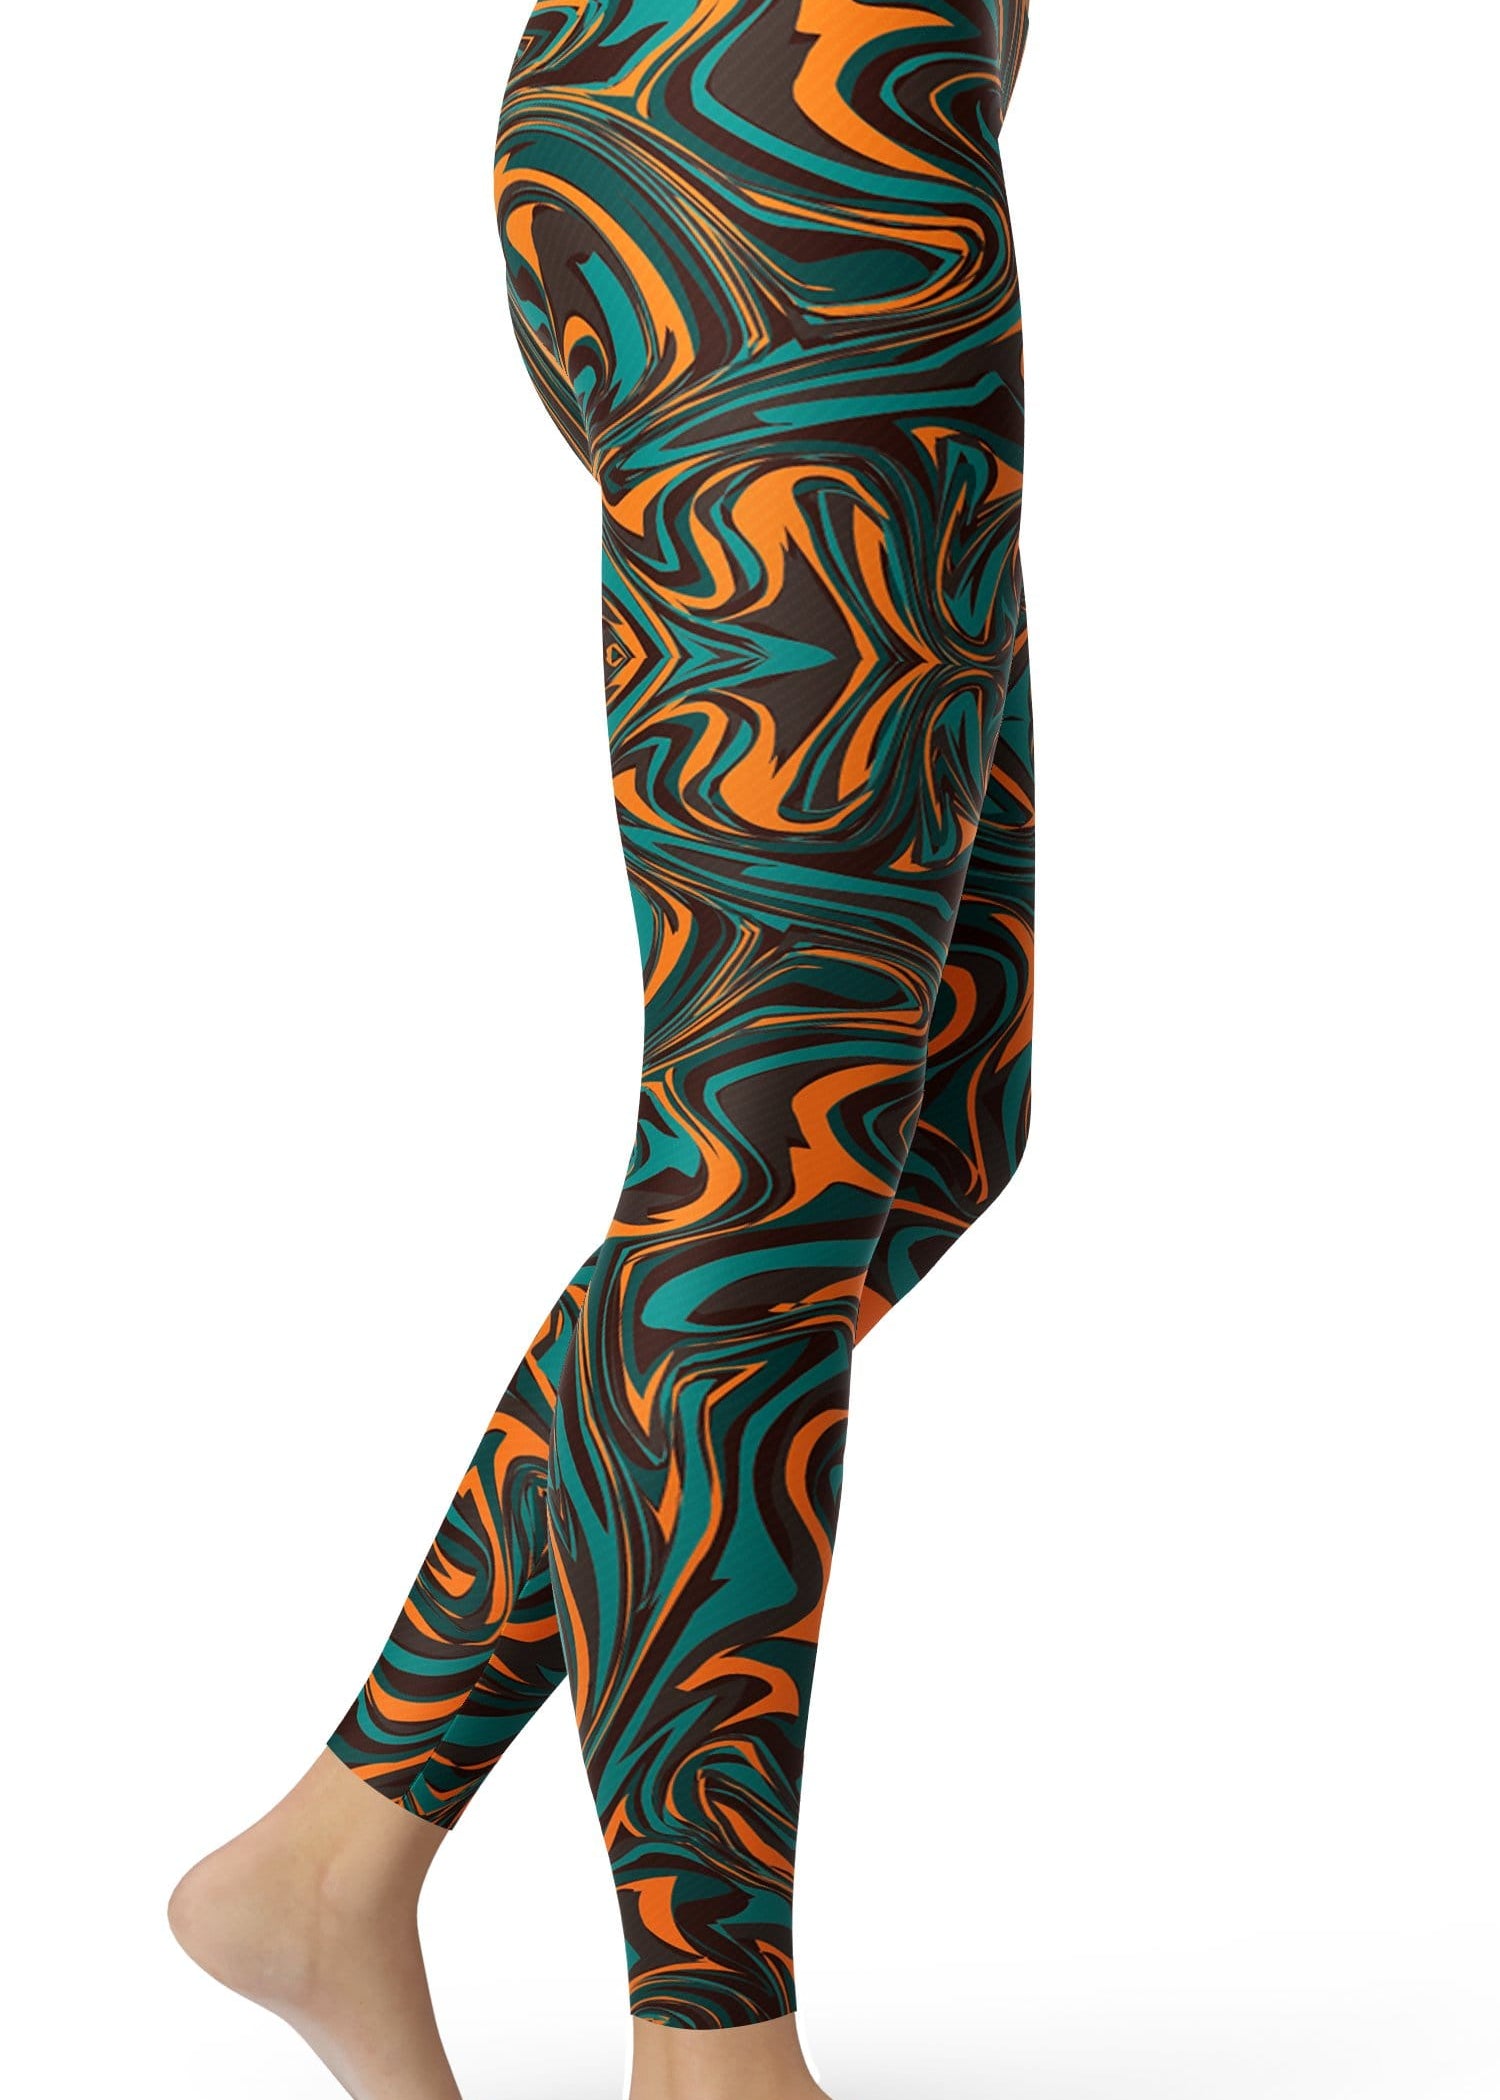 PSYCHEDELIC NEON PAINT Leggings - US FITGIRLS